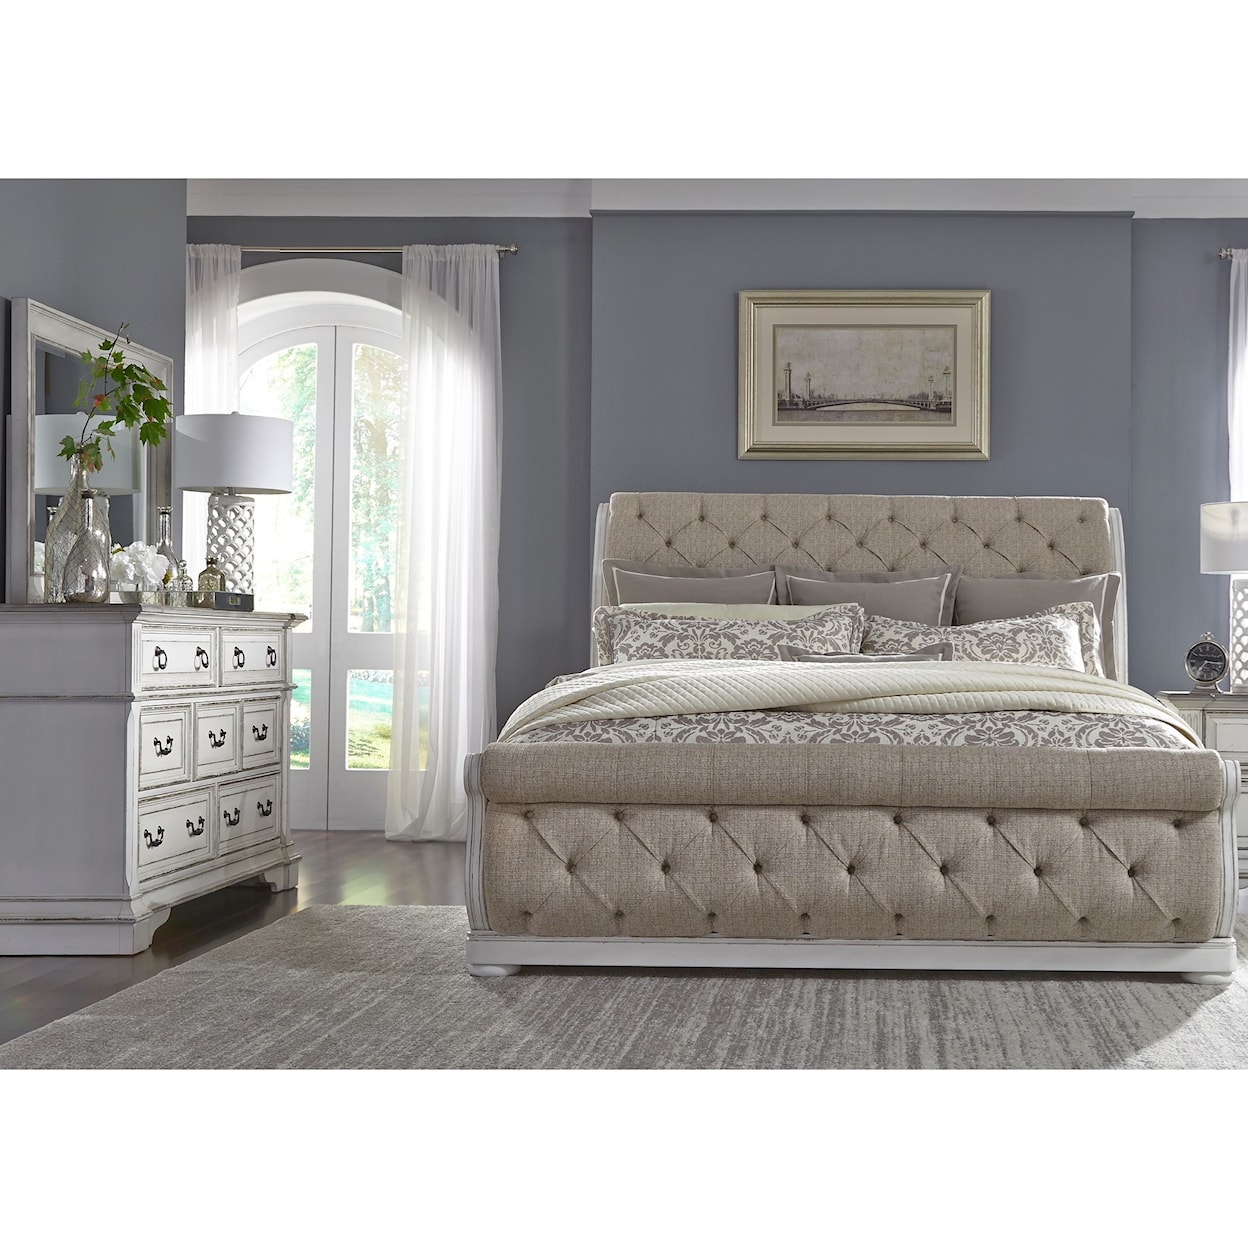 Liberty Furniture Abbey Park Queen Bedroom Group